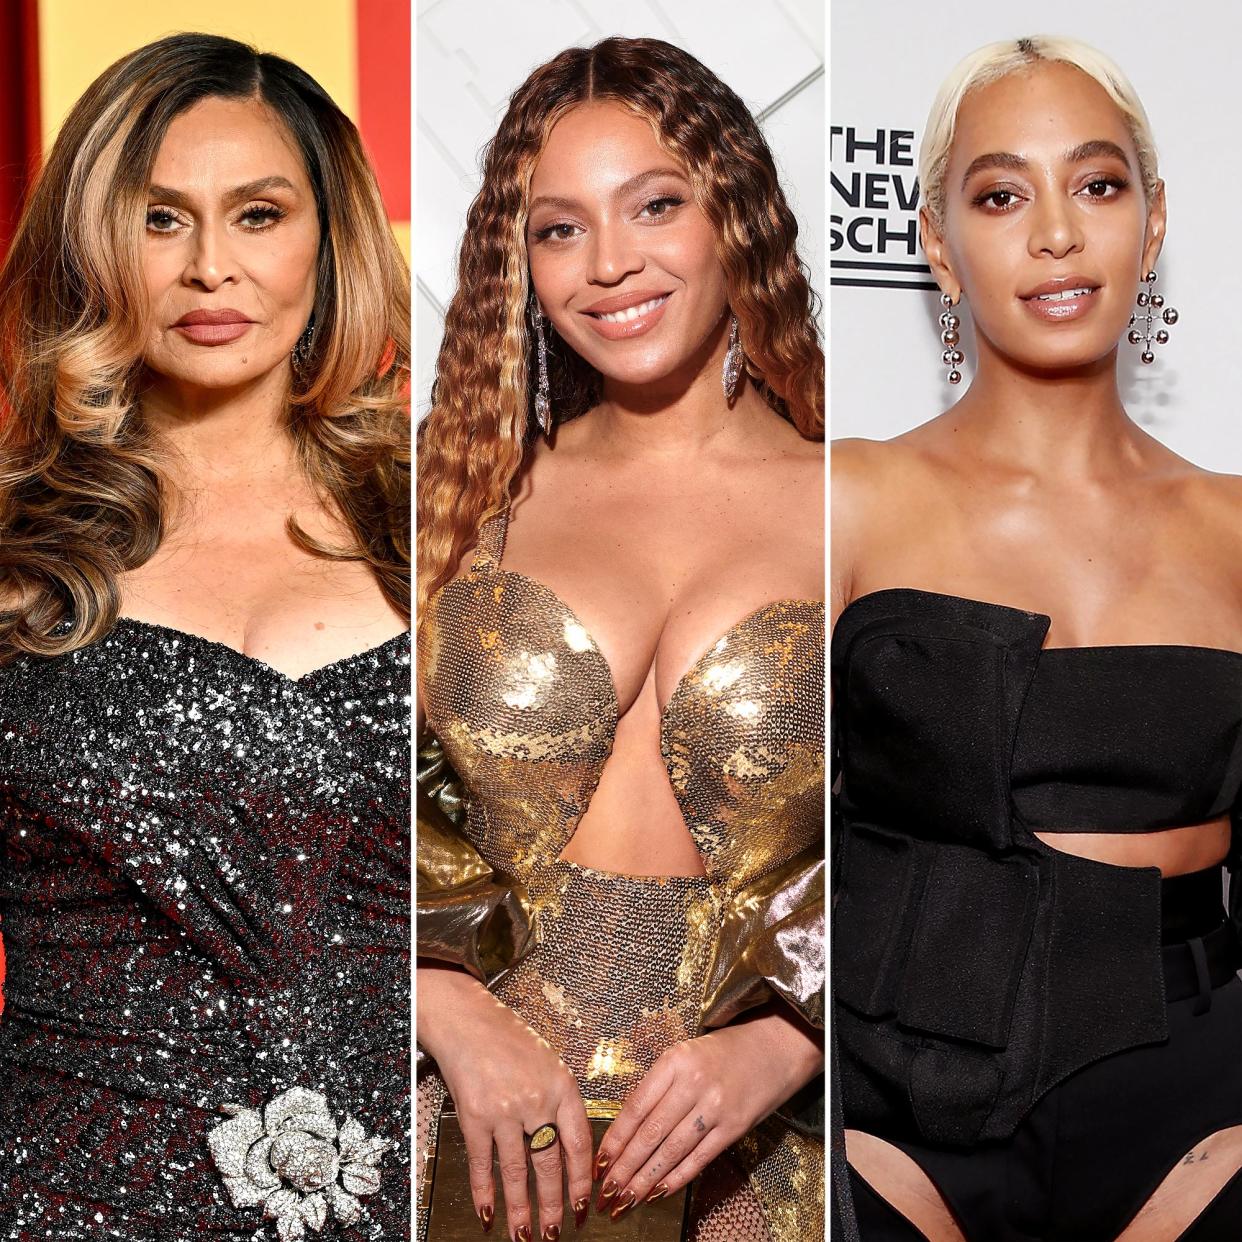 Tina Knowles Calls Daughters Beyonce, Solange’s Kids ‘Super Creative’: ‘Just Want to Support That’